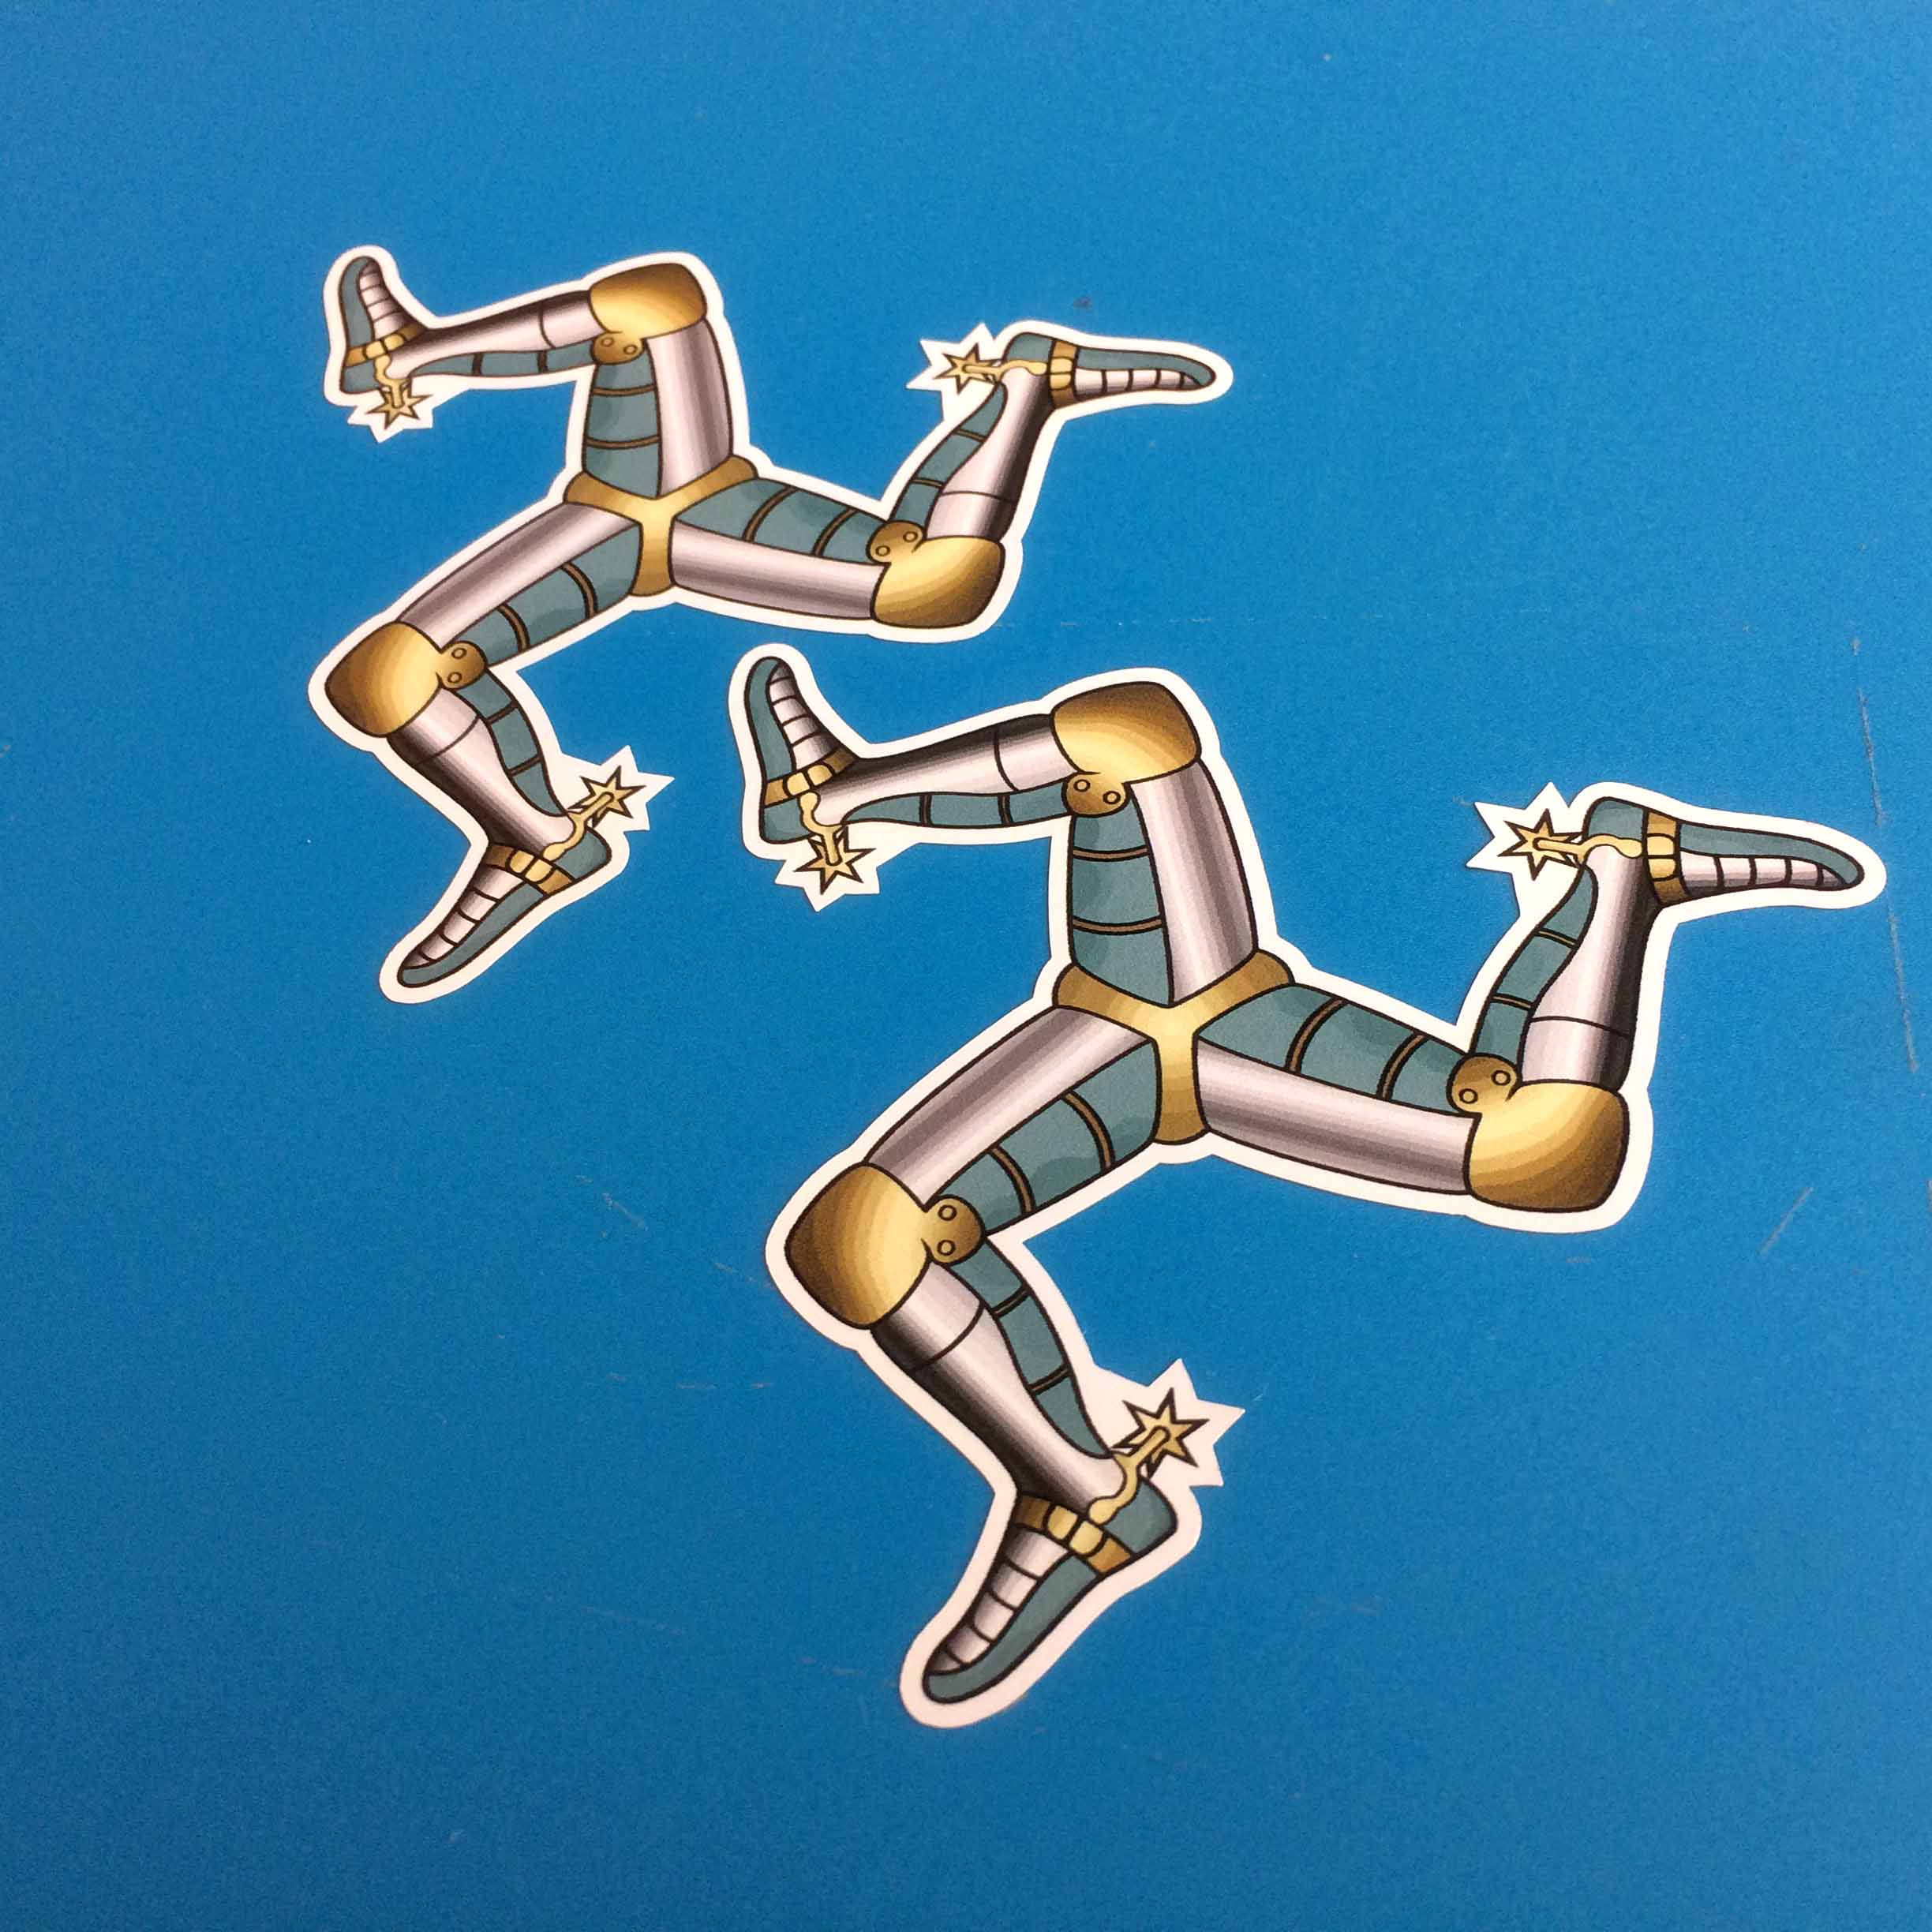 ISLE OF MAN LEGS TRISKELION STICKERS. Three armoured legs with golden spurs.